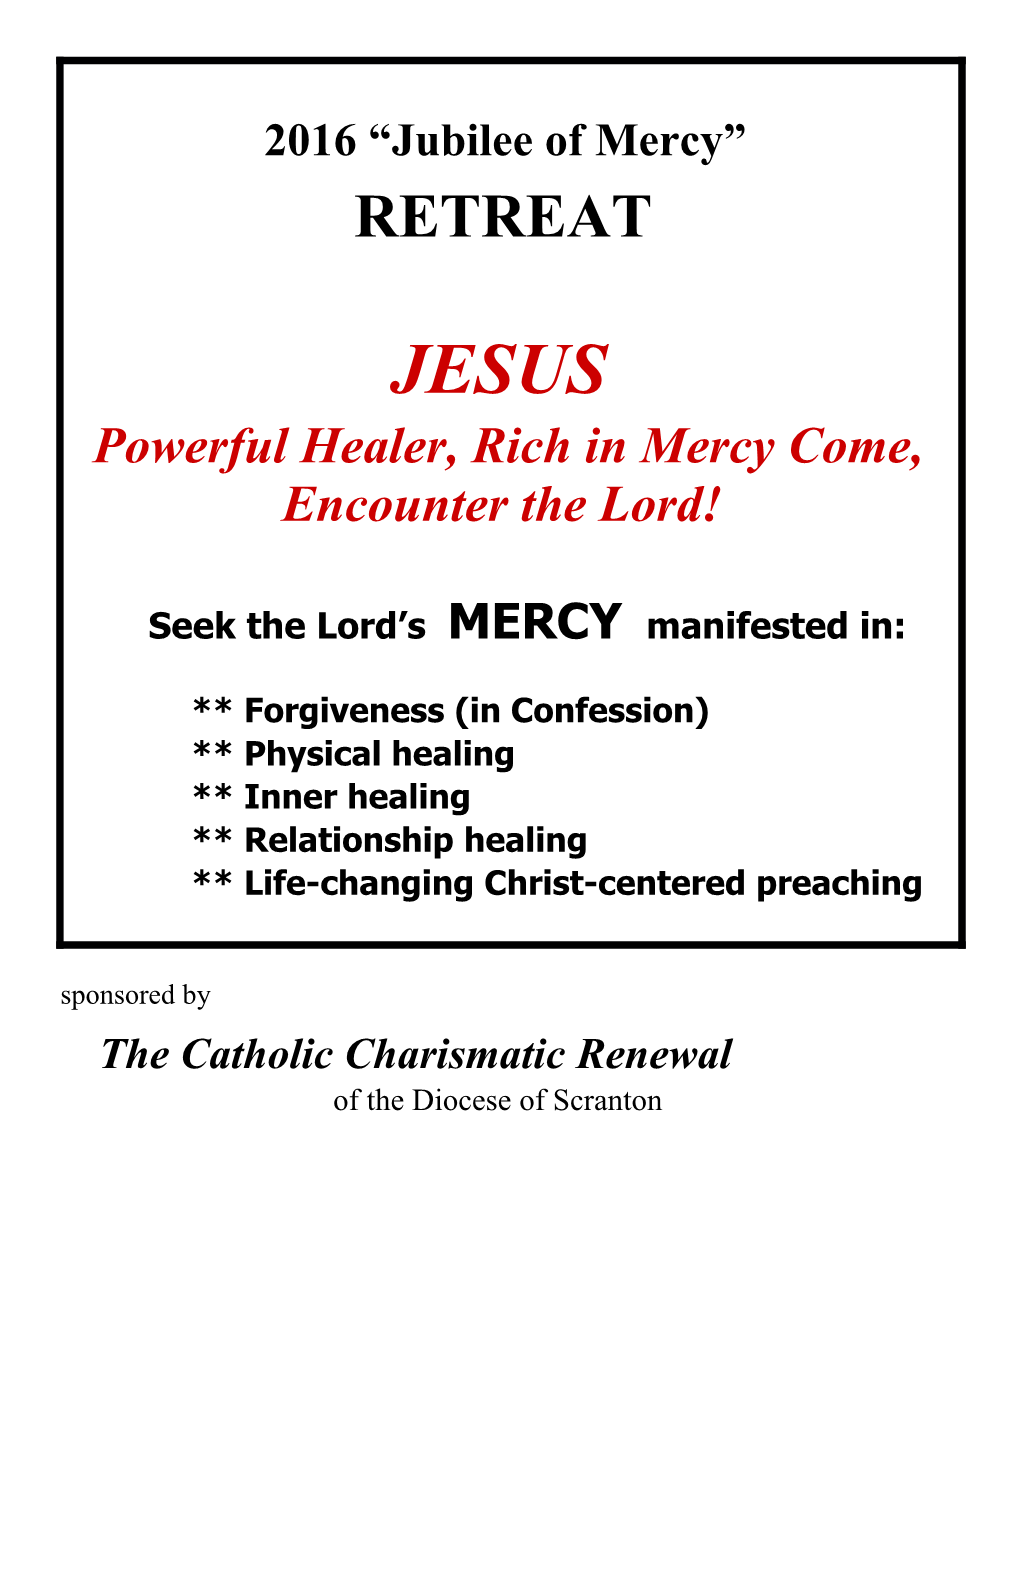 Powerful Healer, Rich in Mercy Come, Encounter the Lord!